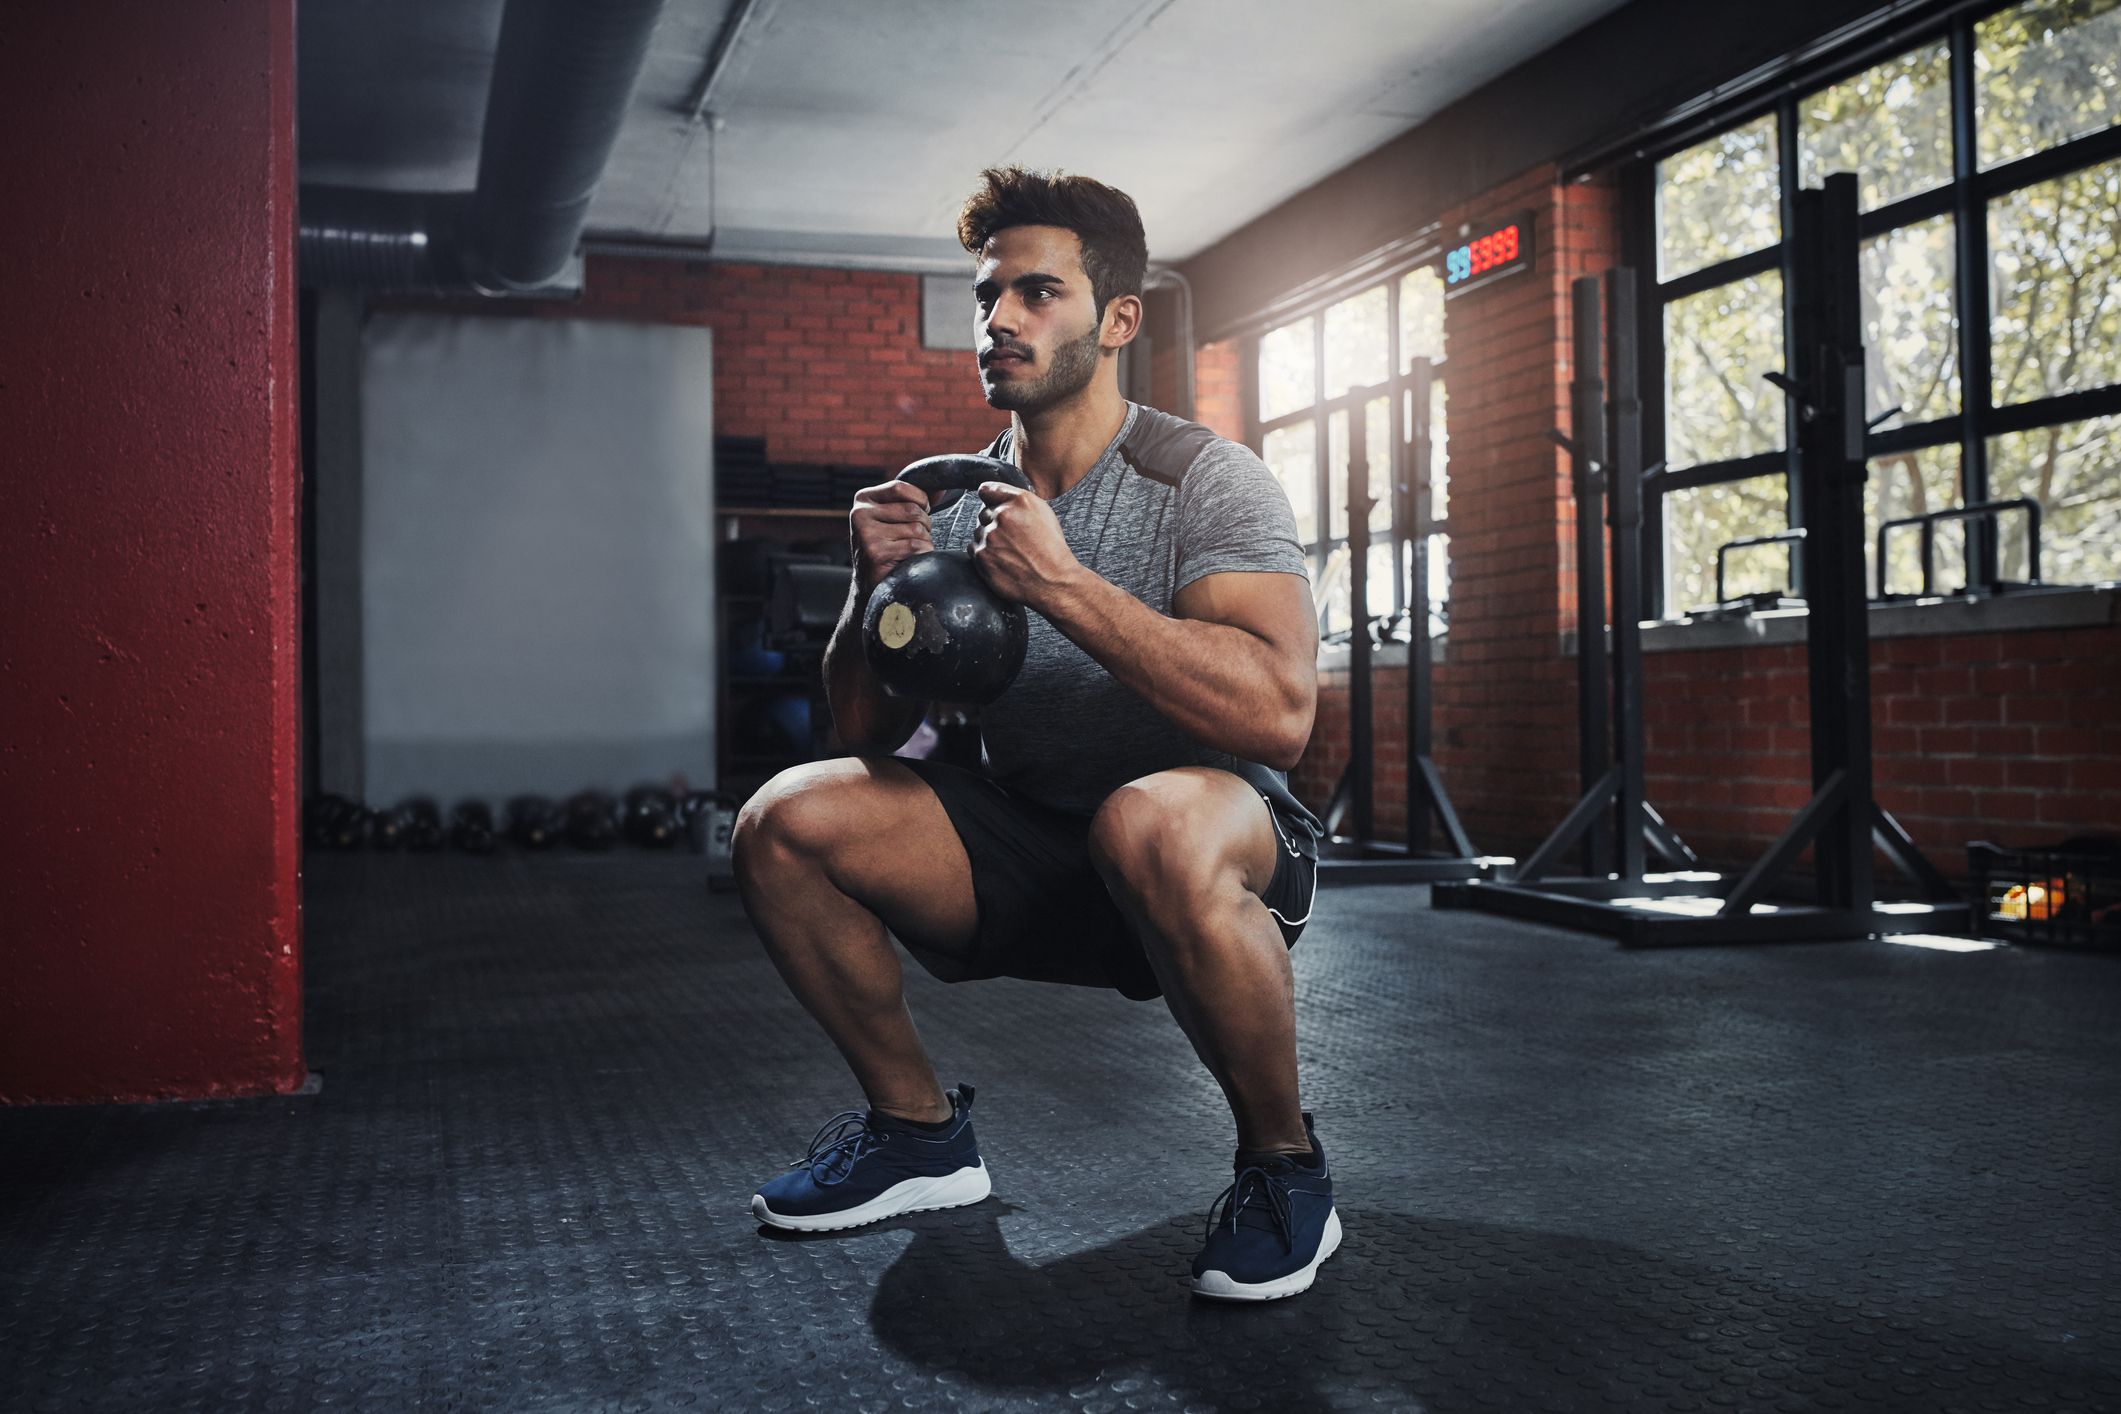 This Warm Up Will Help Maximize Your Leg Day Performance | Men’s Health  Muscle